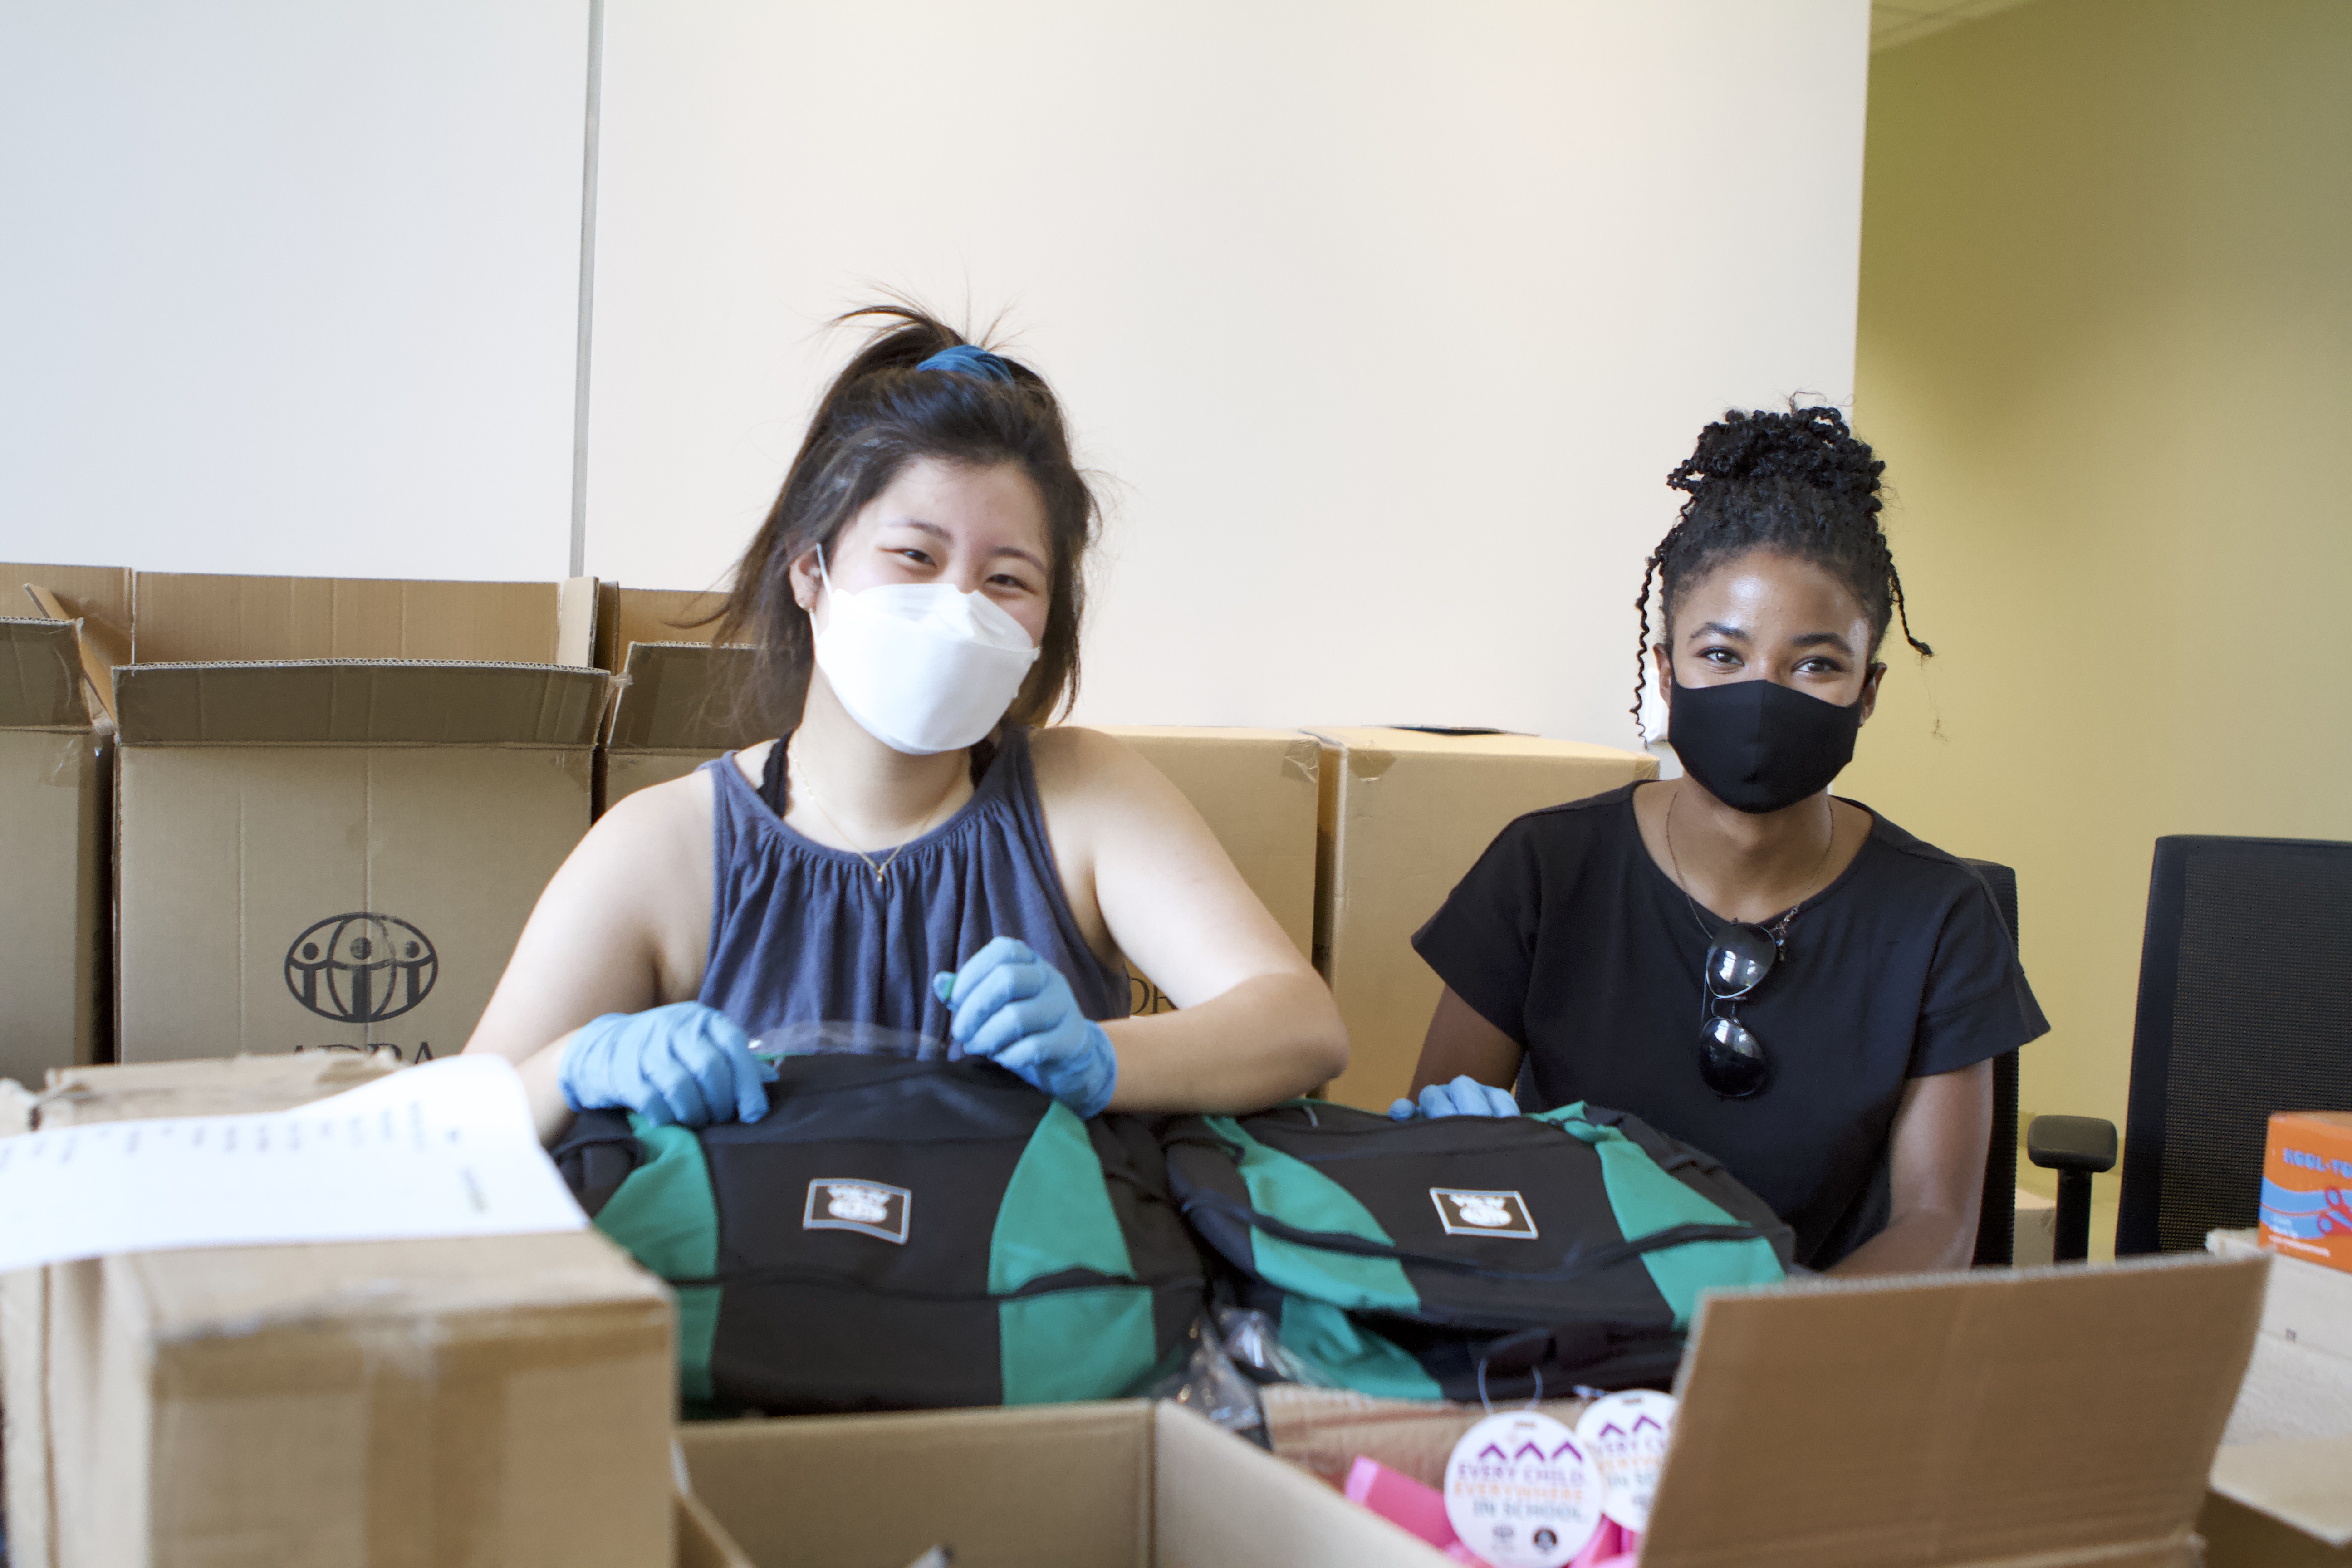 La Sierra University students Ashley Peak, left and Jodi Wilson pause for a photo while filling backpacks with school supplies. (Photos: courtesy La Sierra University)